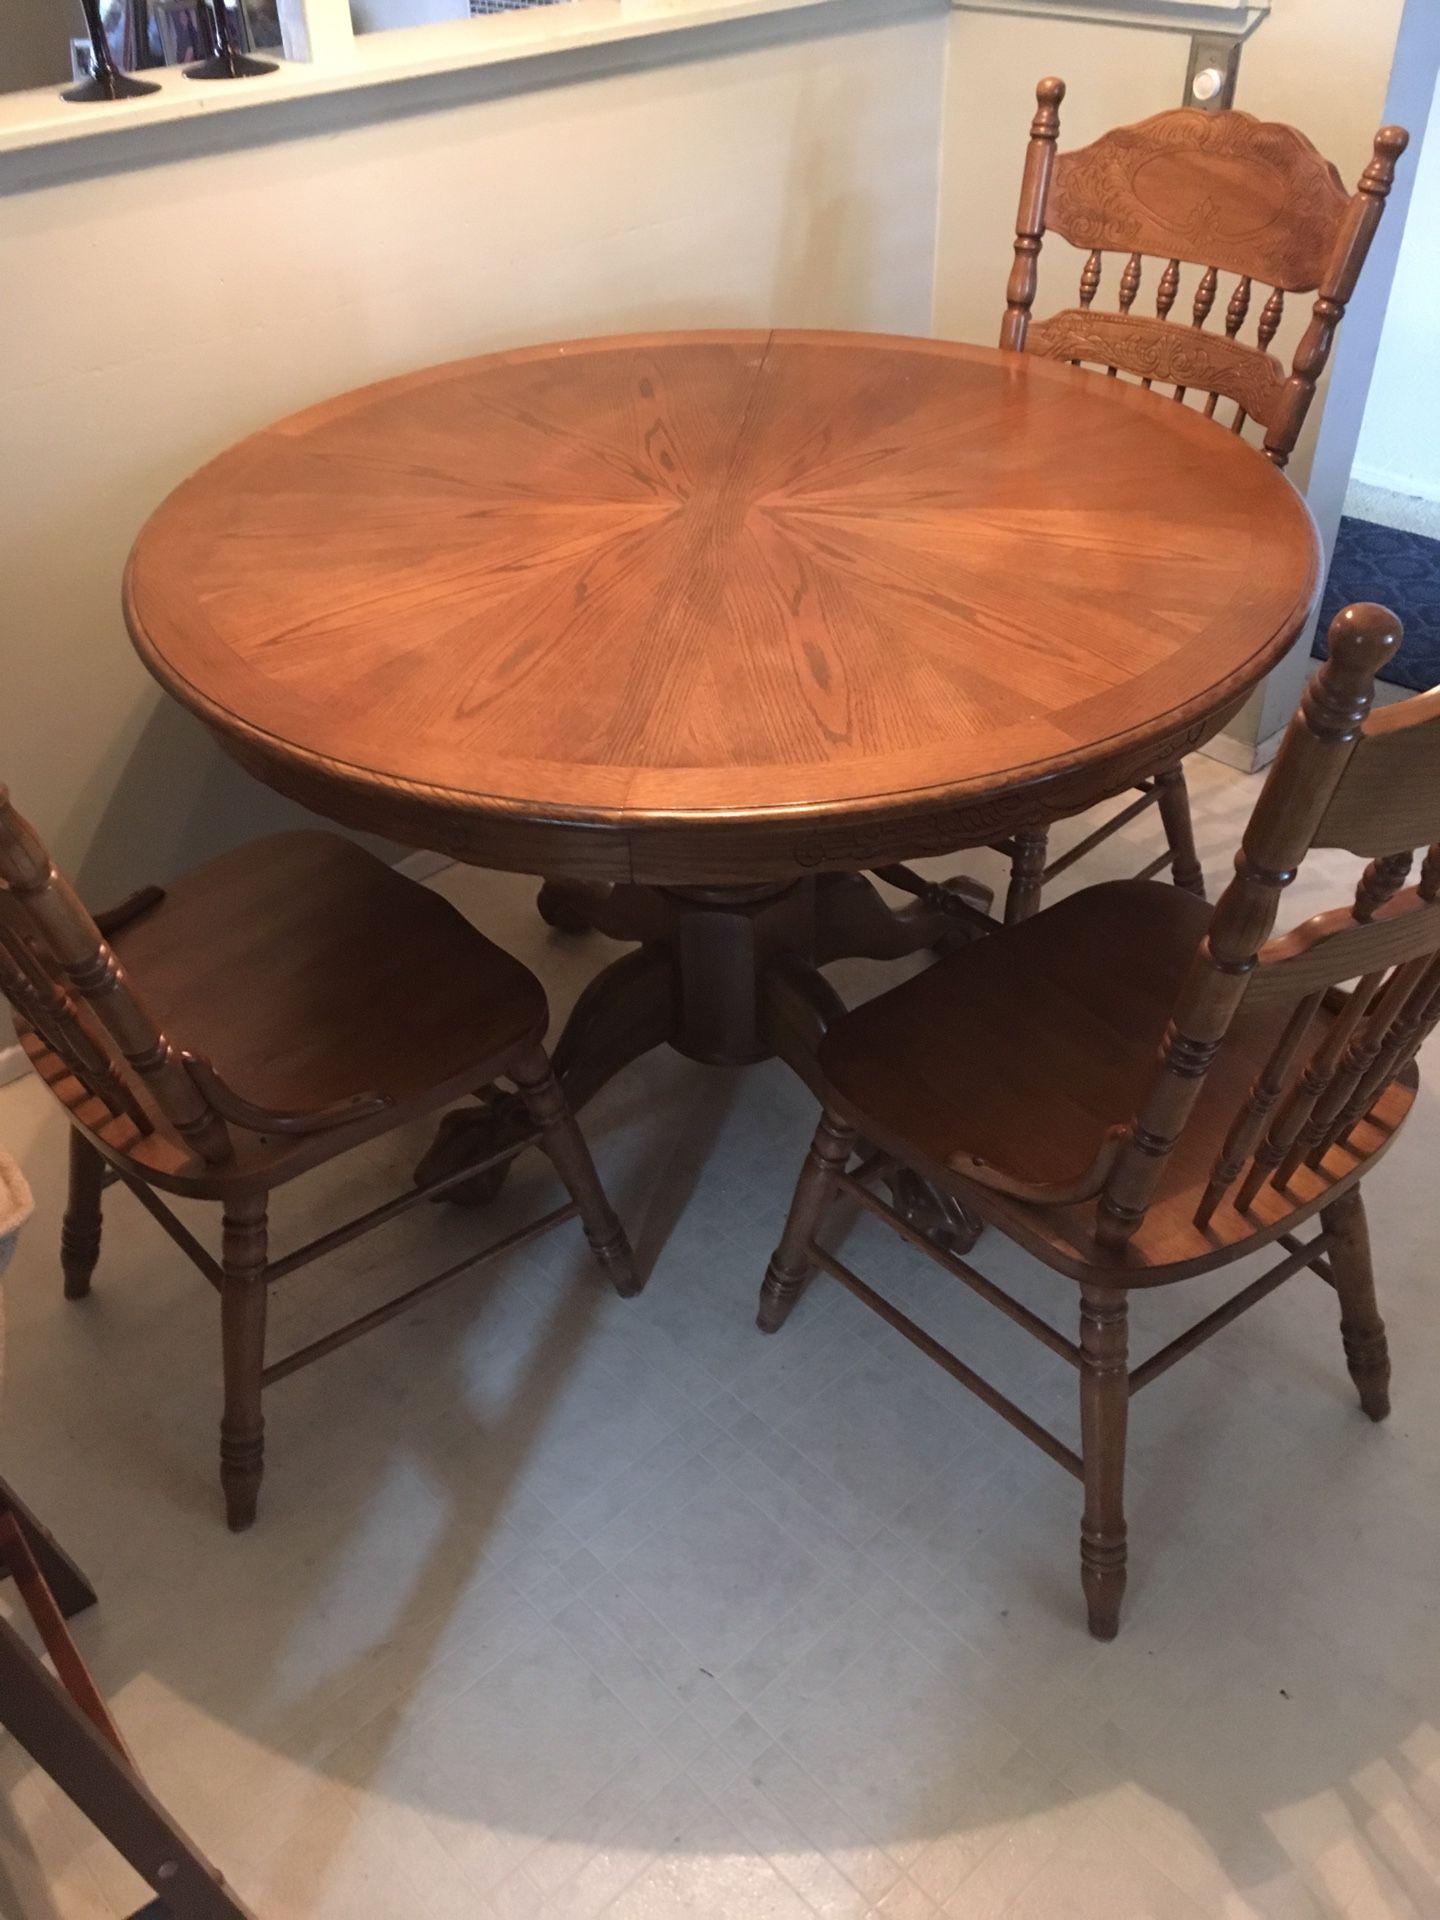 Dining table with four chairs and a leaf